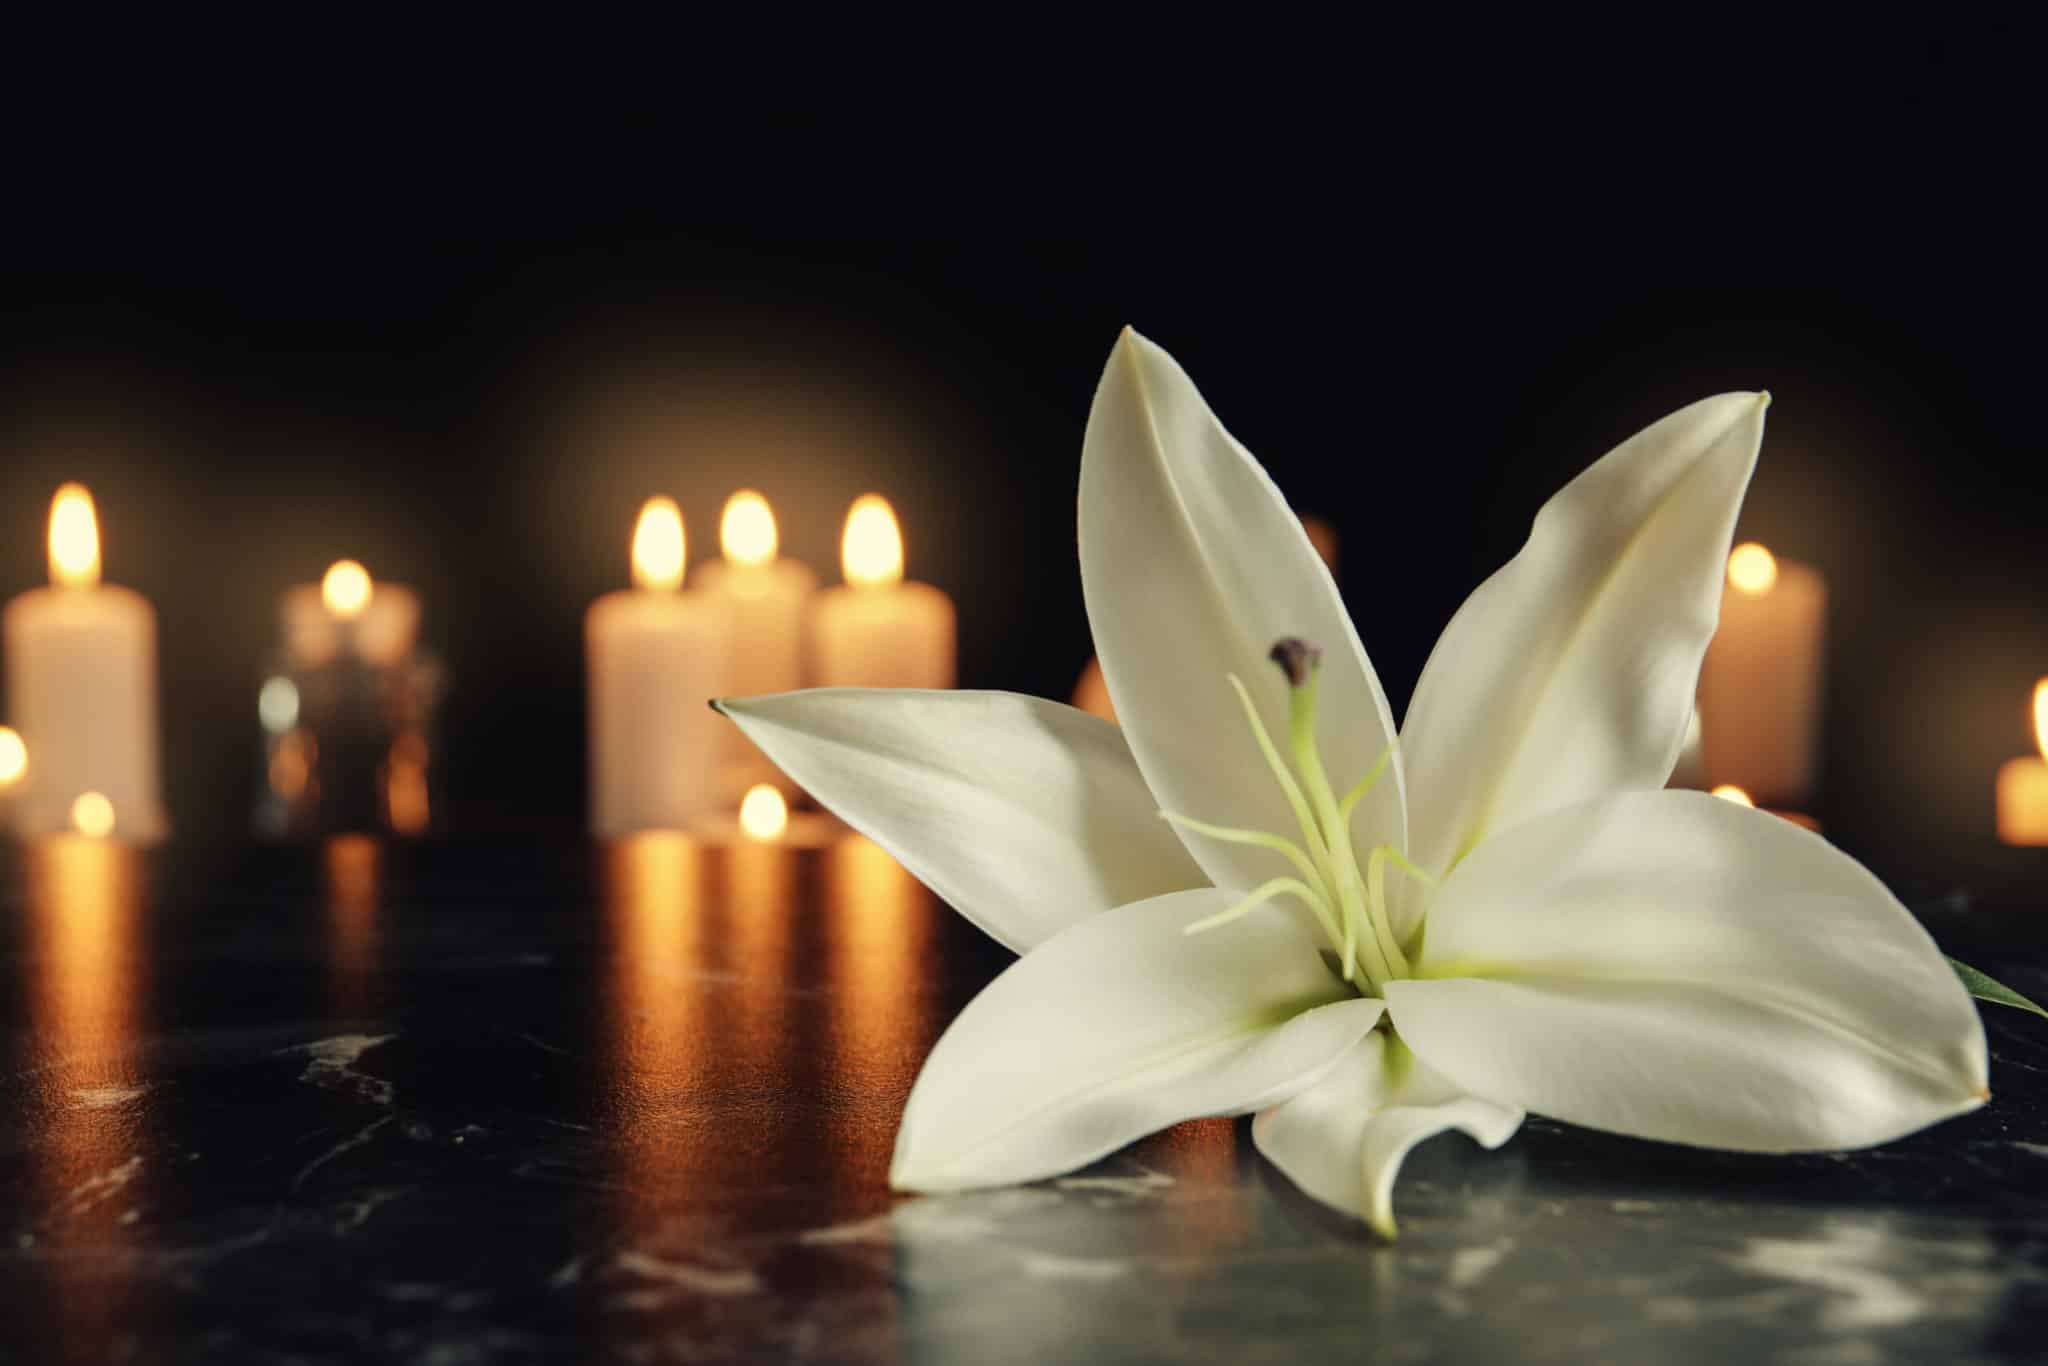 Flower with candles